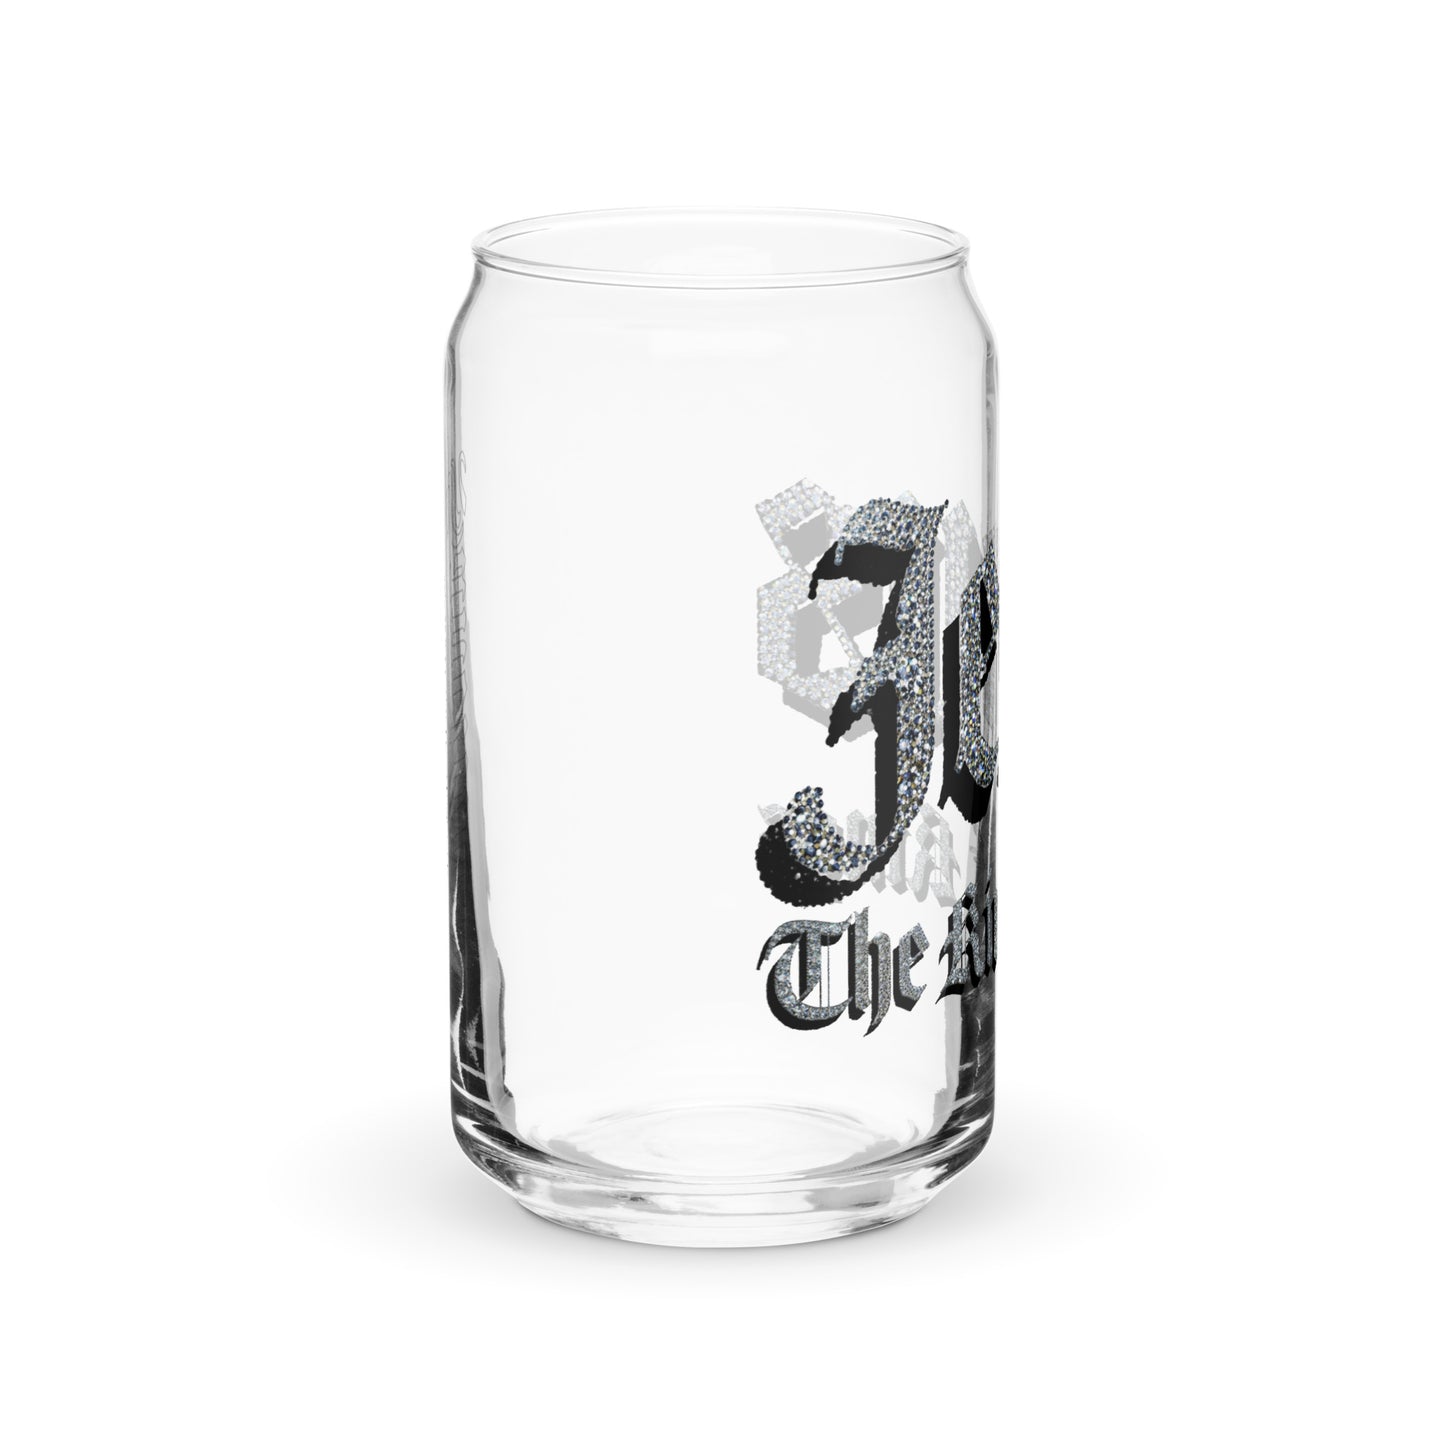 Can-shaped glass